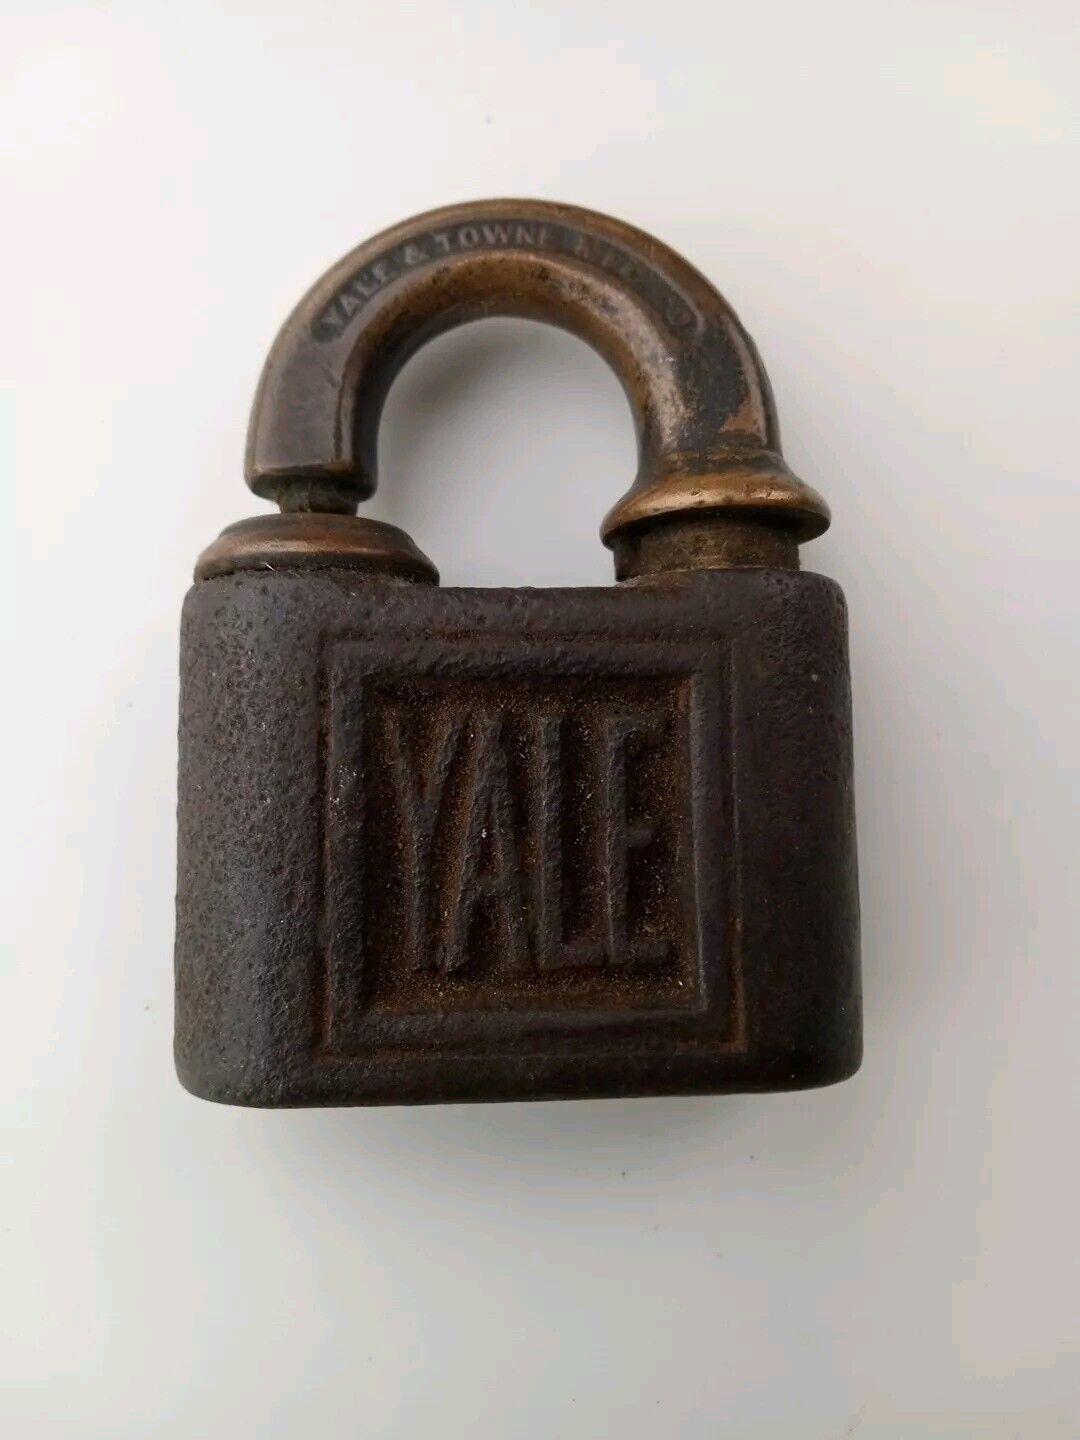 Antique Vintage YALE & TOWNE Padlock Early Heavy Yale Lock Stanford CT 